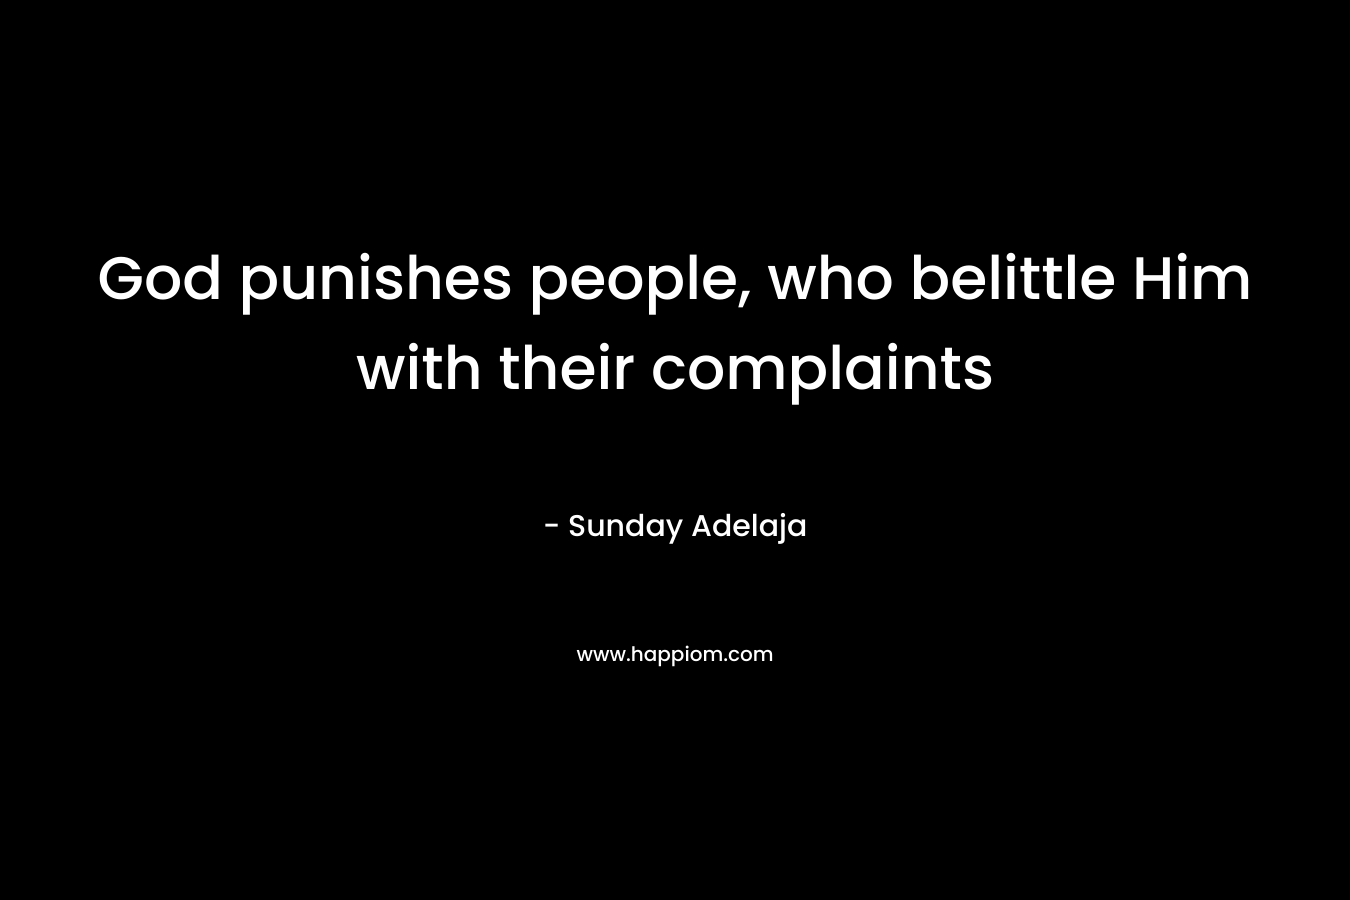 God punishes people, who belittle Him with their complaints